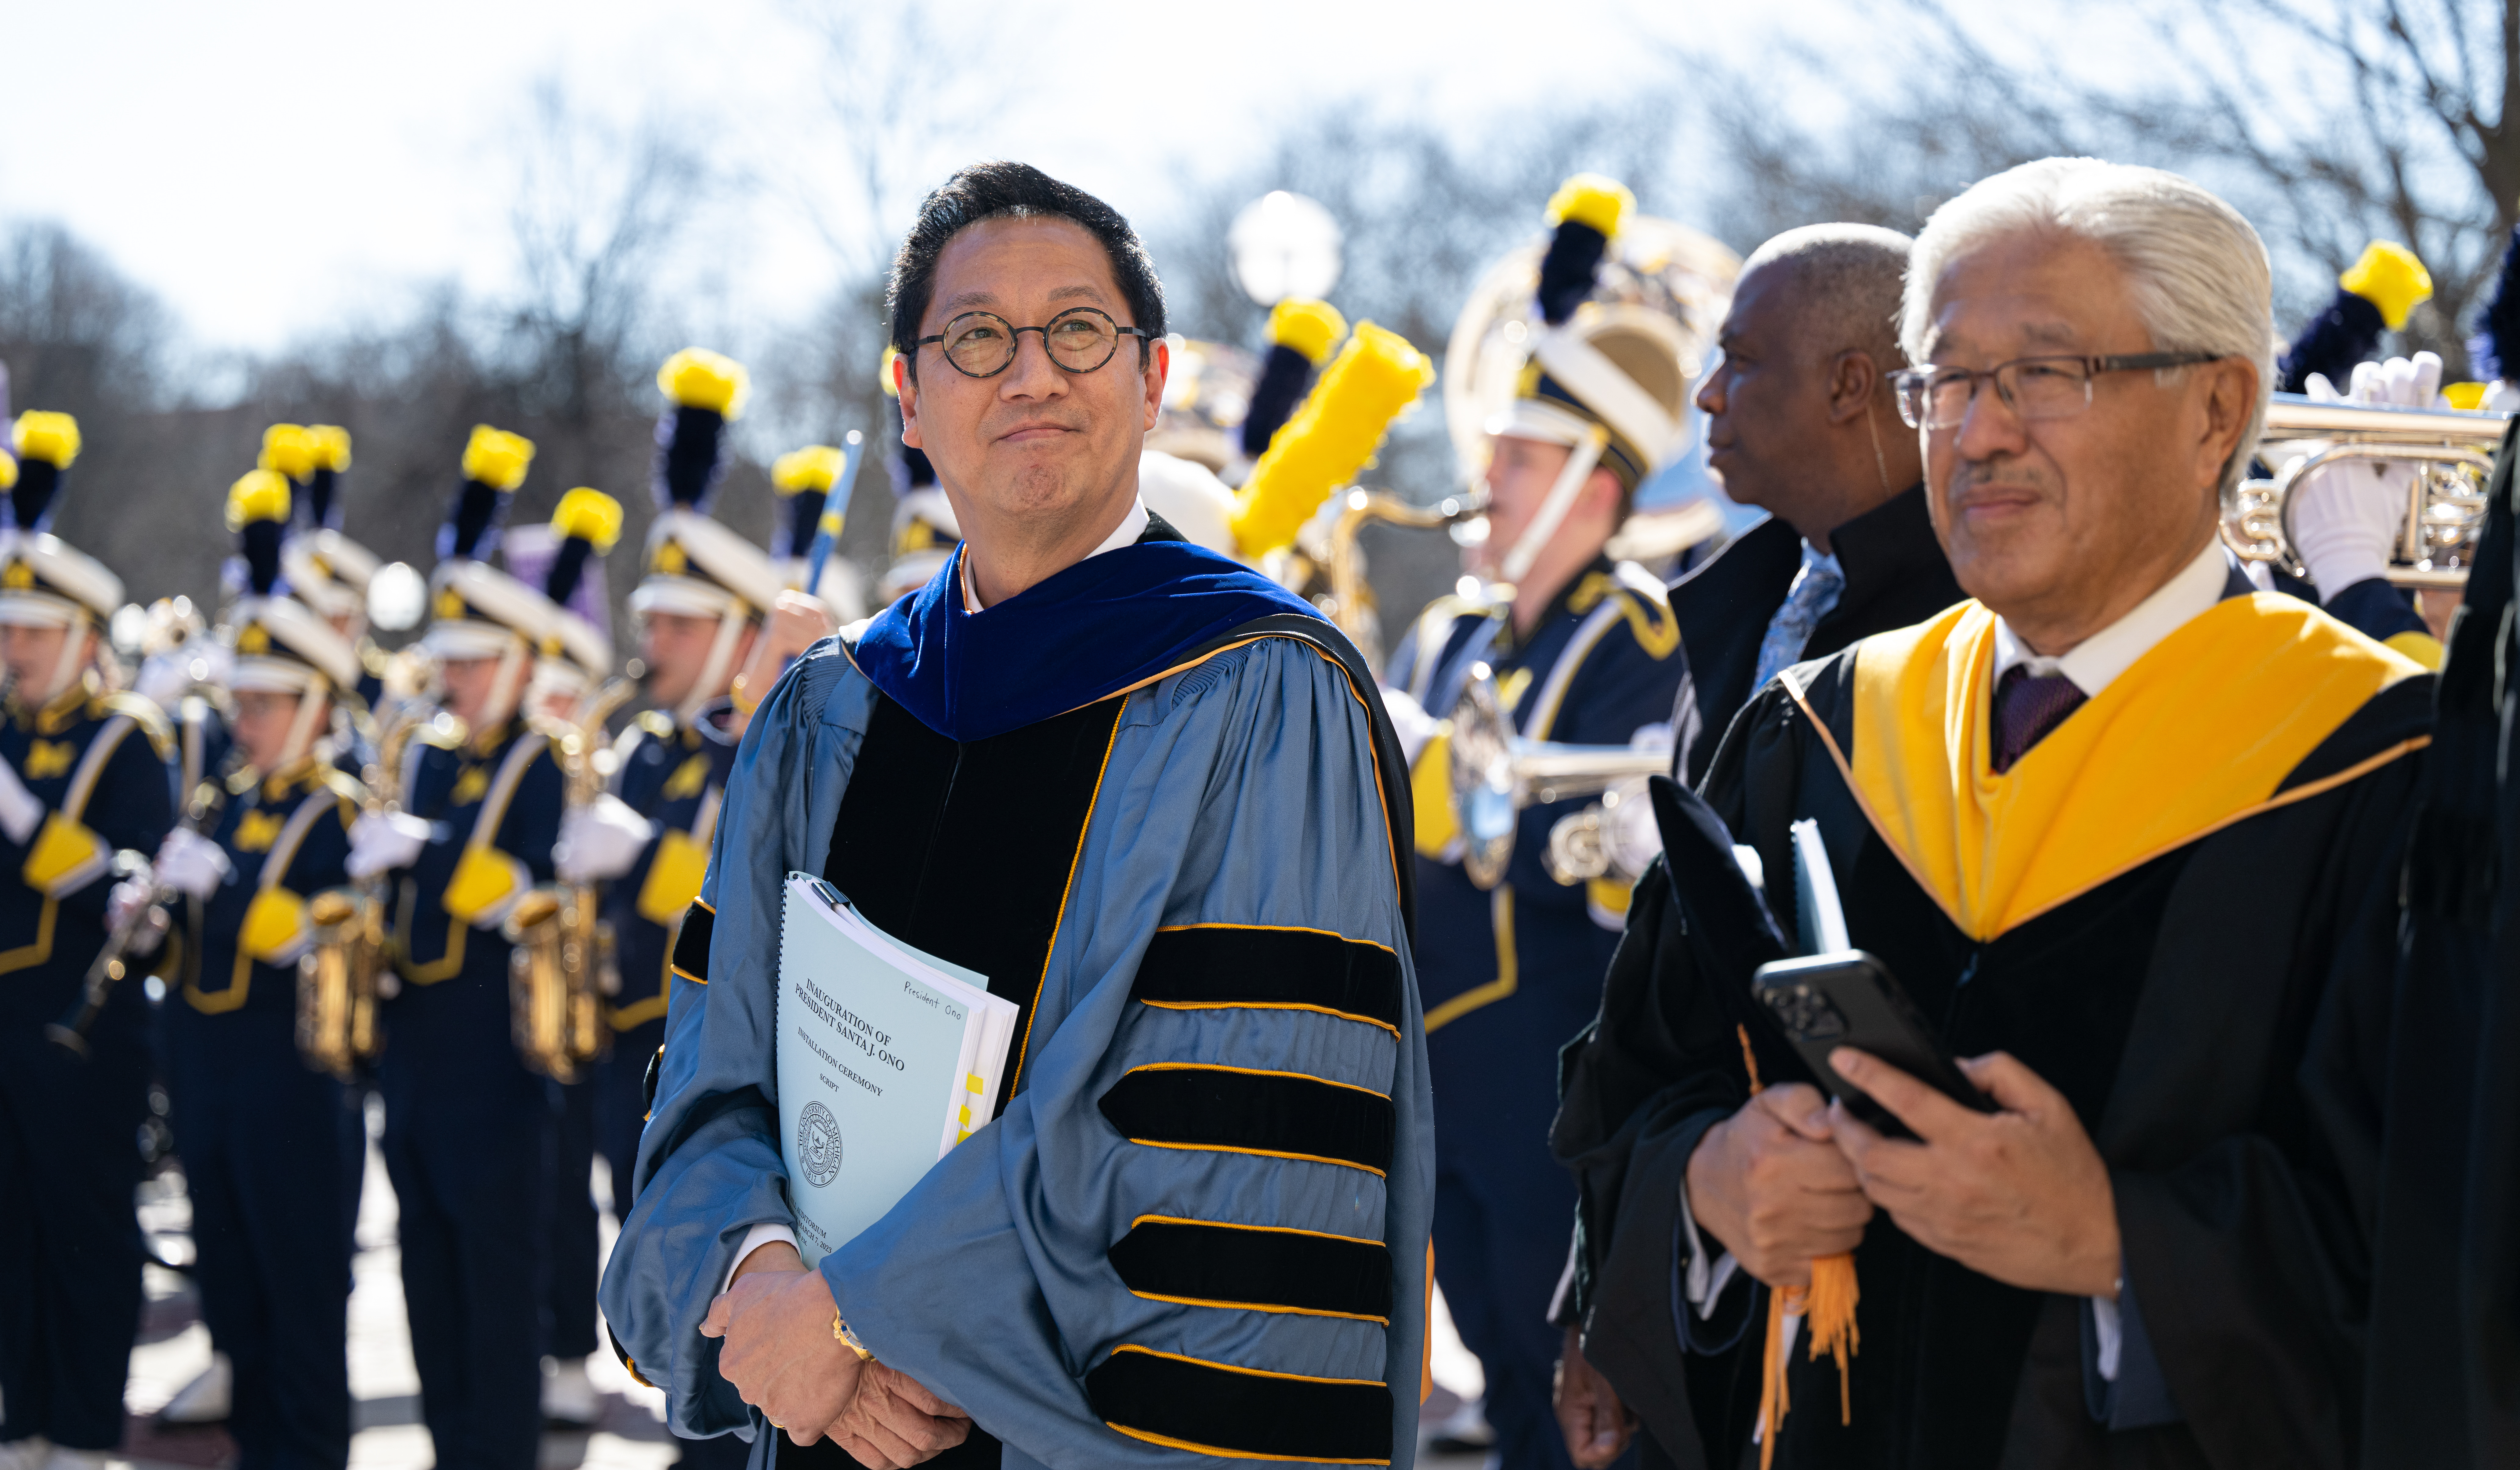 Procession Leading To Santa J. Ono Is Installed As The 15th President Of The University Of Michigan. Inauguration.